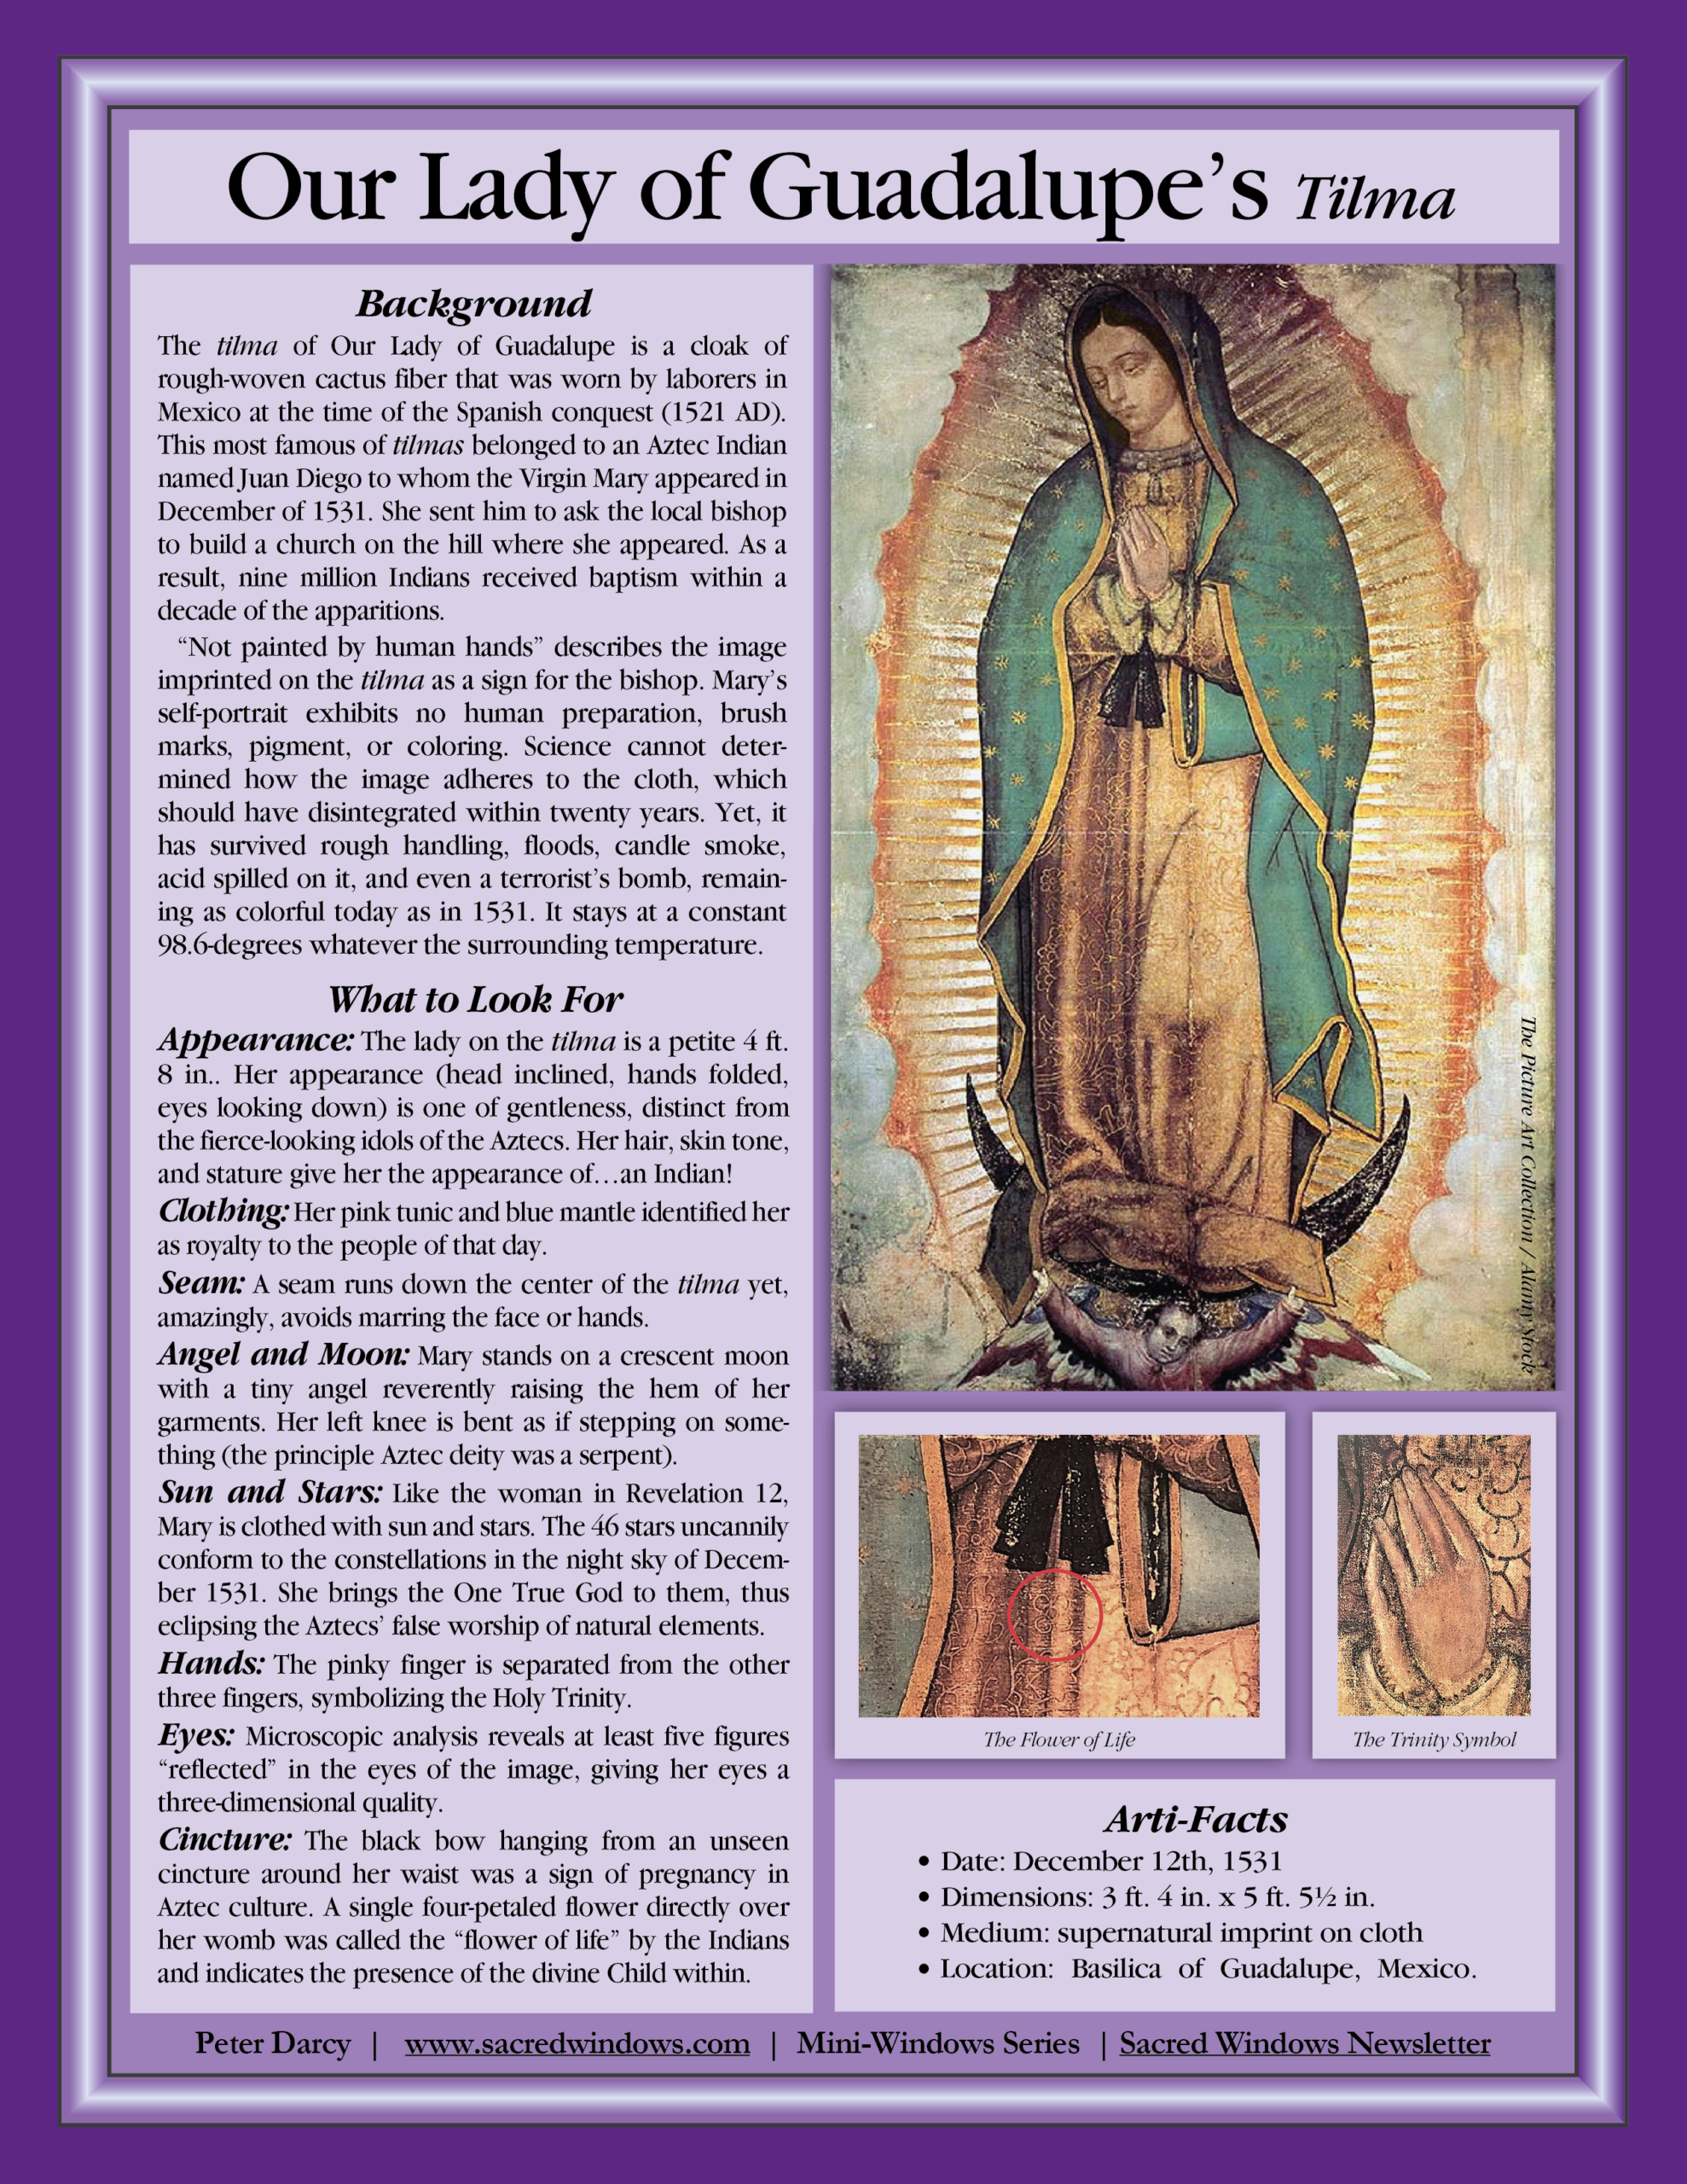 Mini-Window of Our Lady of Guadalupe's Tilma with text